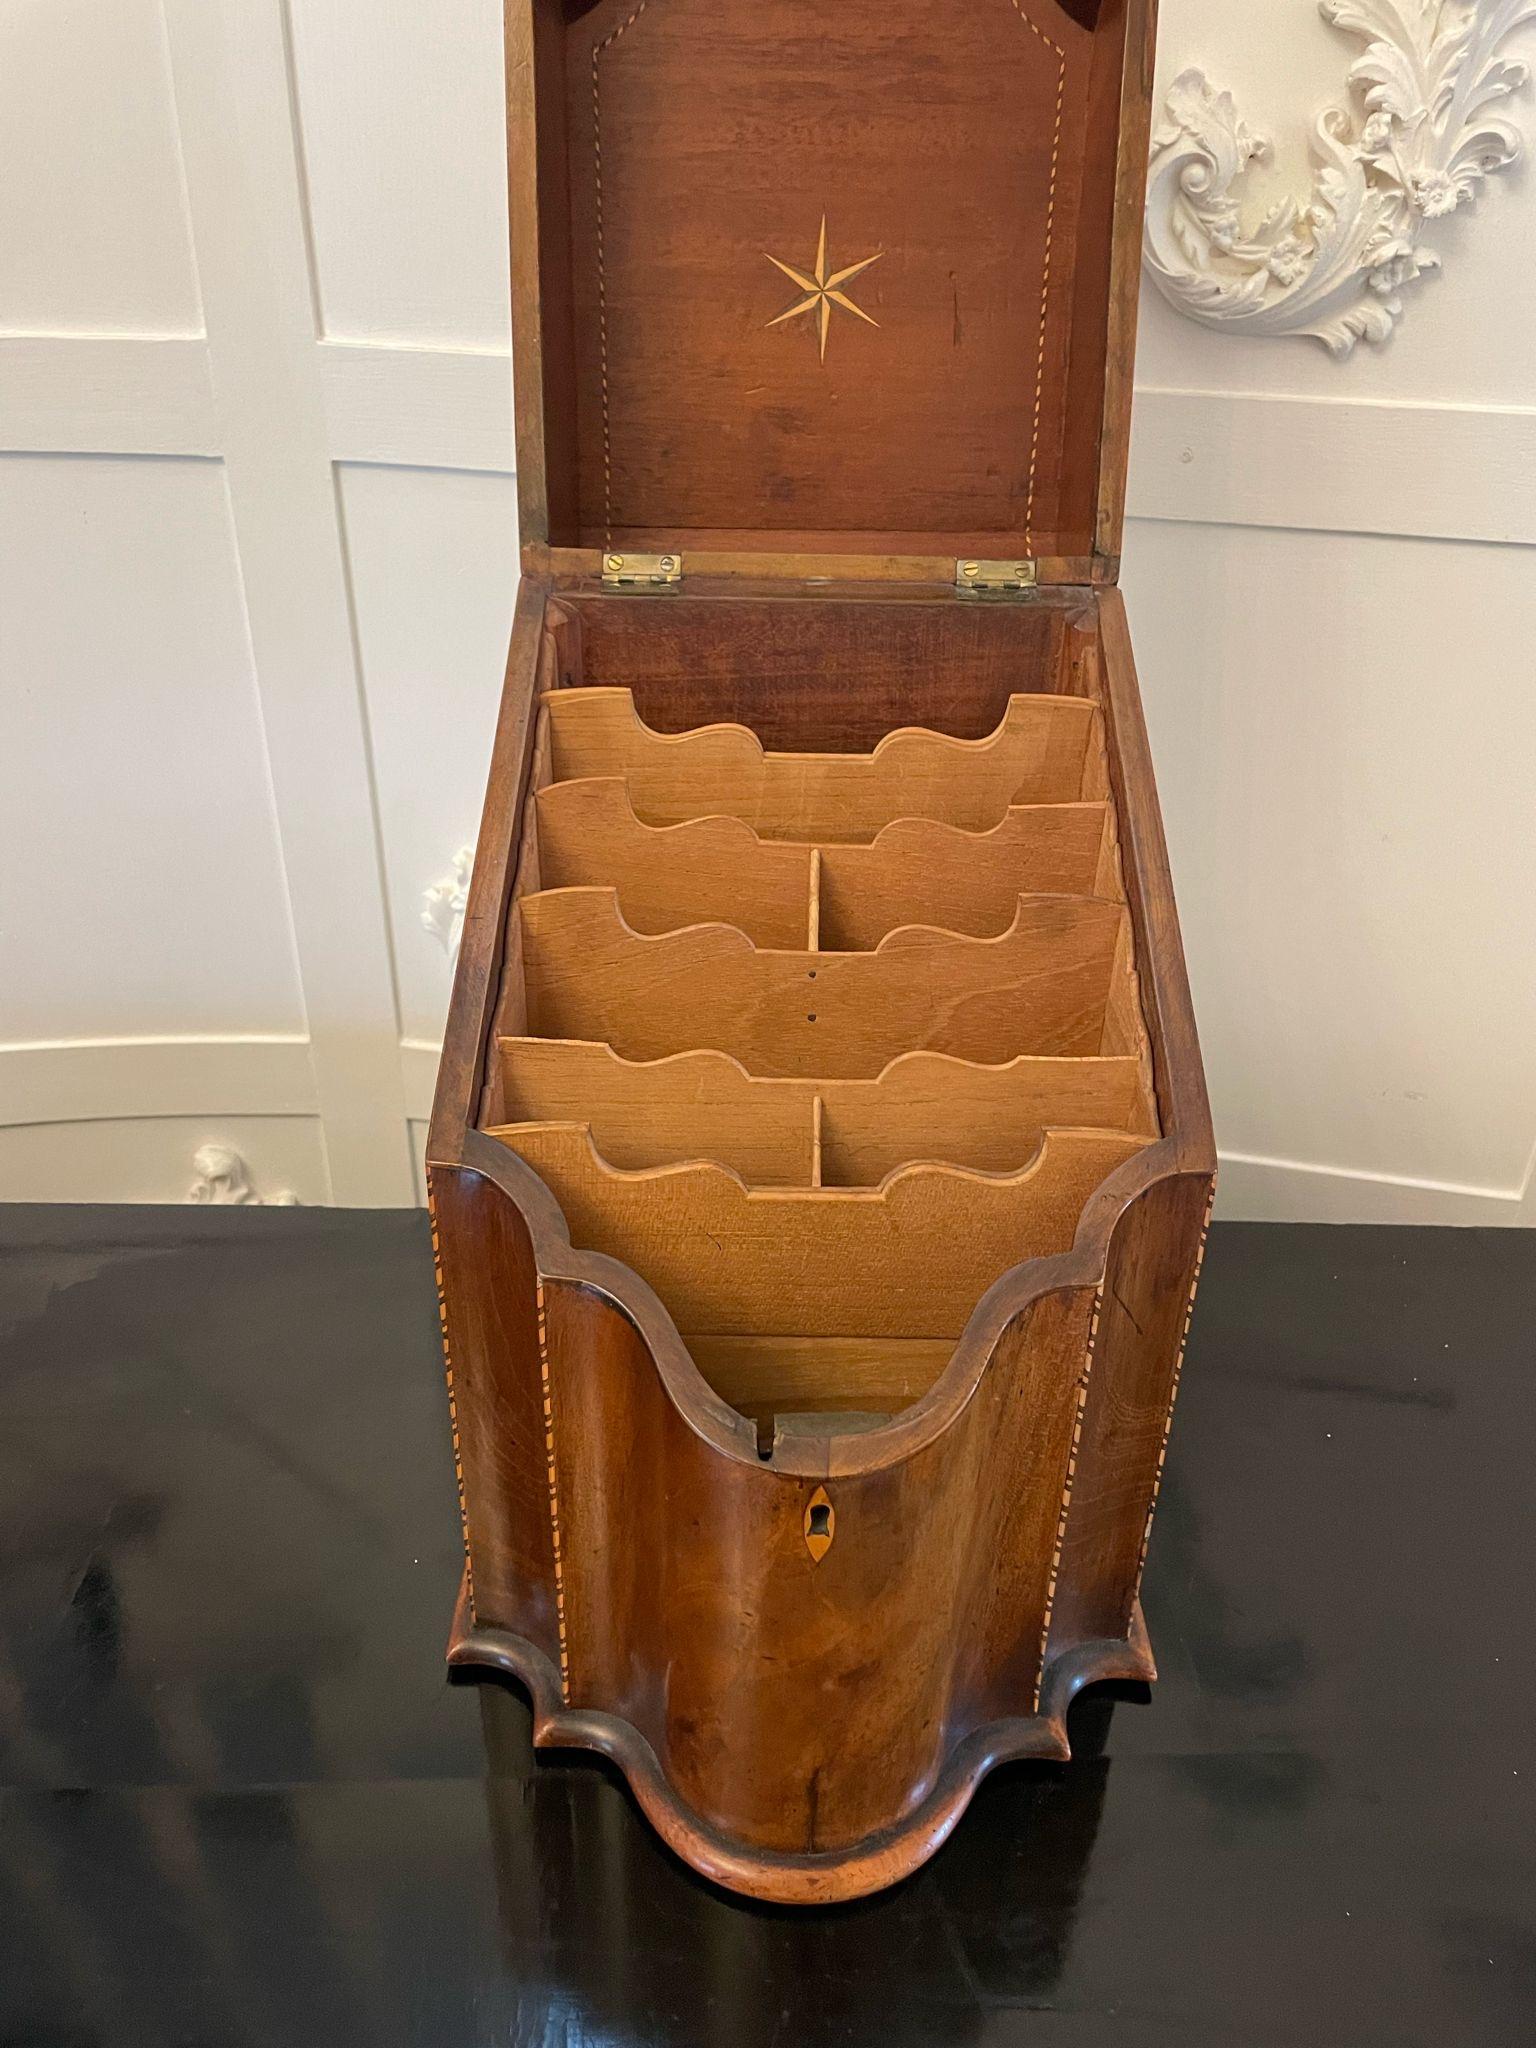 Antique George III quality mahogany inlaid post box having a serpentine shaped front lift up lid with a satinwood inlaid shell to the centre opening to reveal compartments for letters 


Dimensions:
Height 38.5 cm (15.16 in)
Width 24 cm (9.45